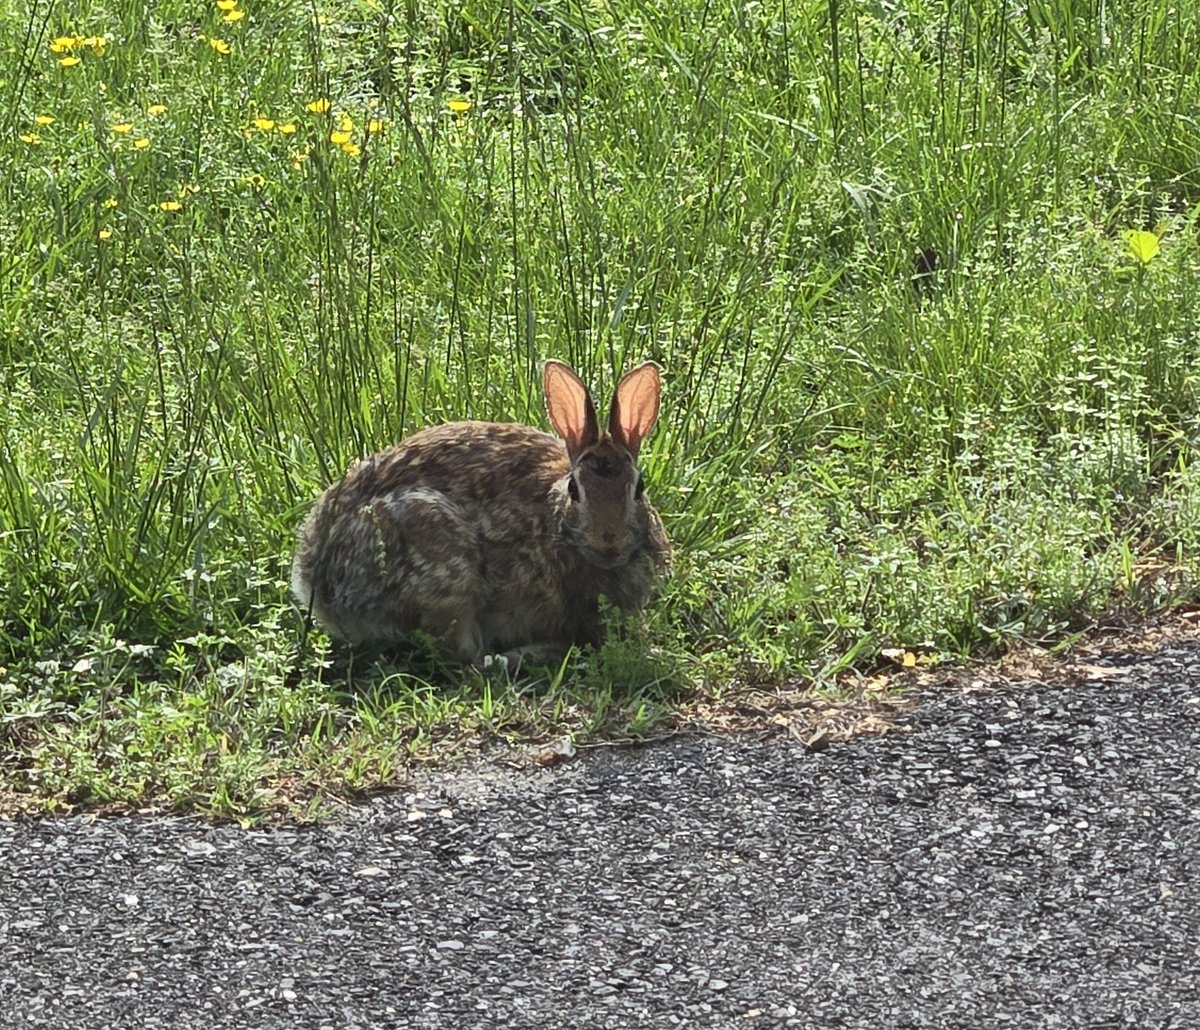 Bunny neighbor came by for breakfast. #HappyWednesday